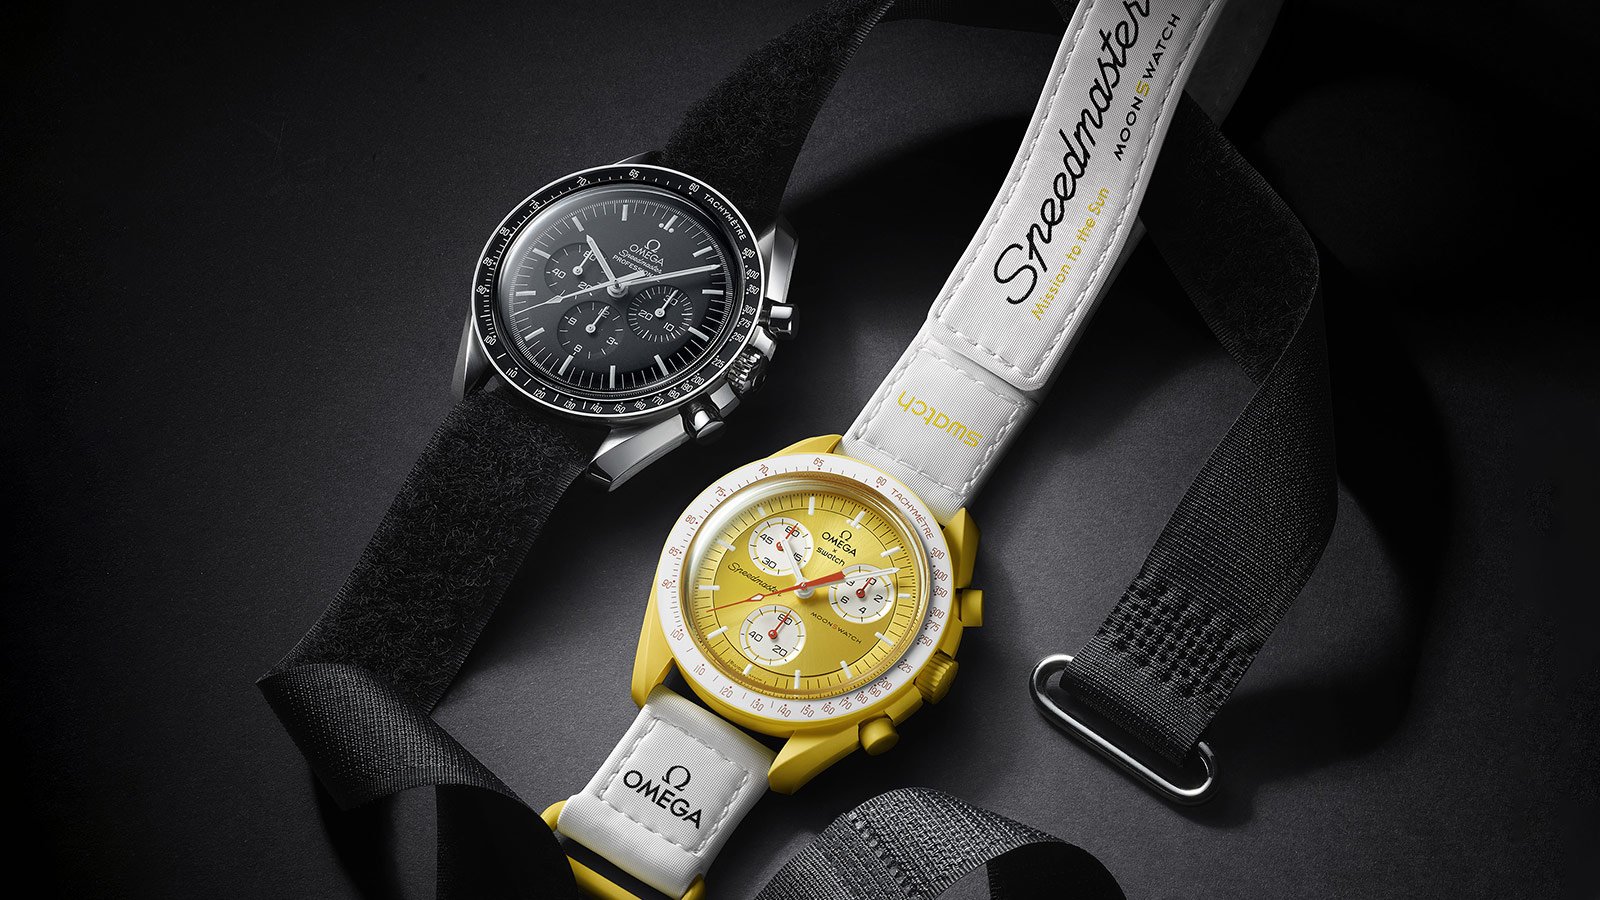 Omega x Swatch MoonSwatch Review: The Good, The Bad, The